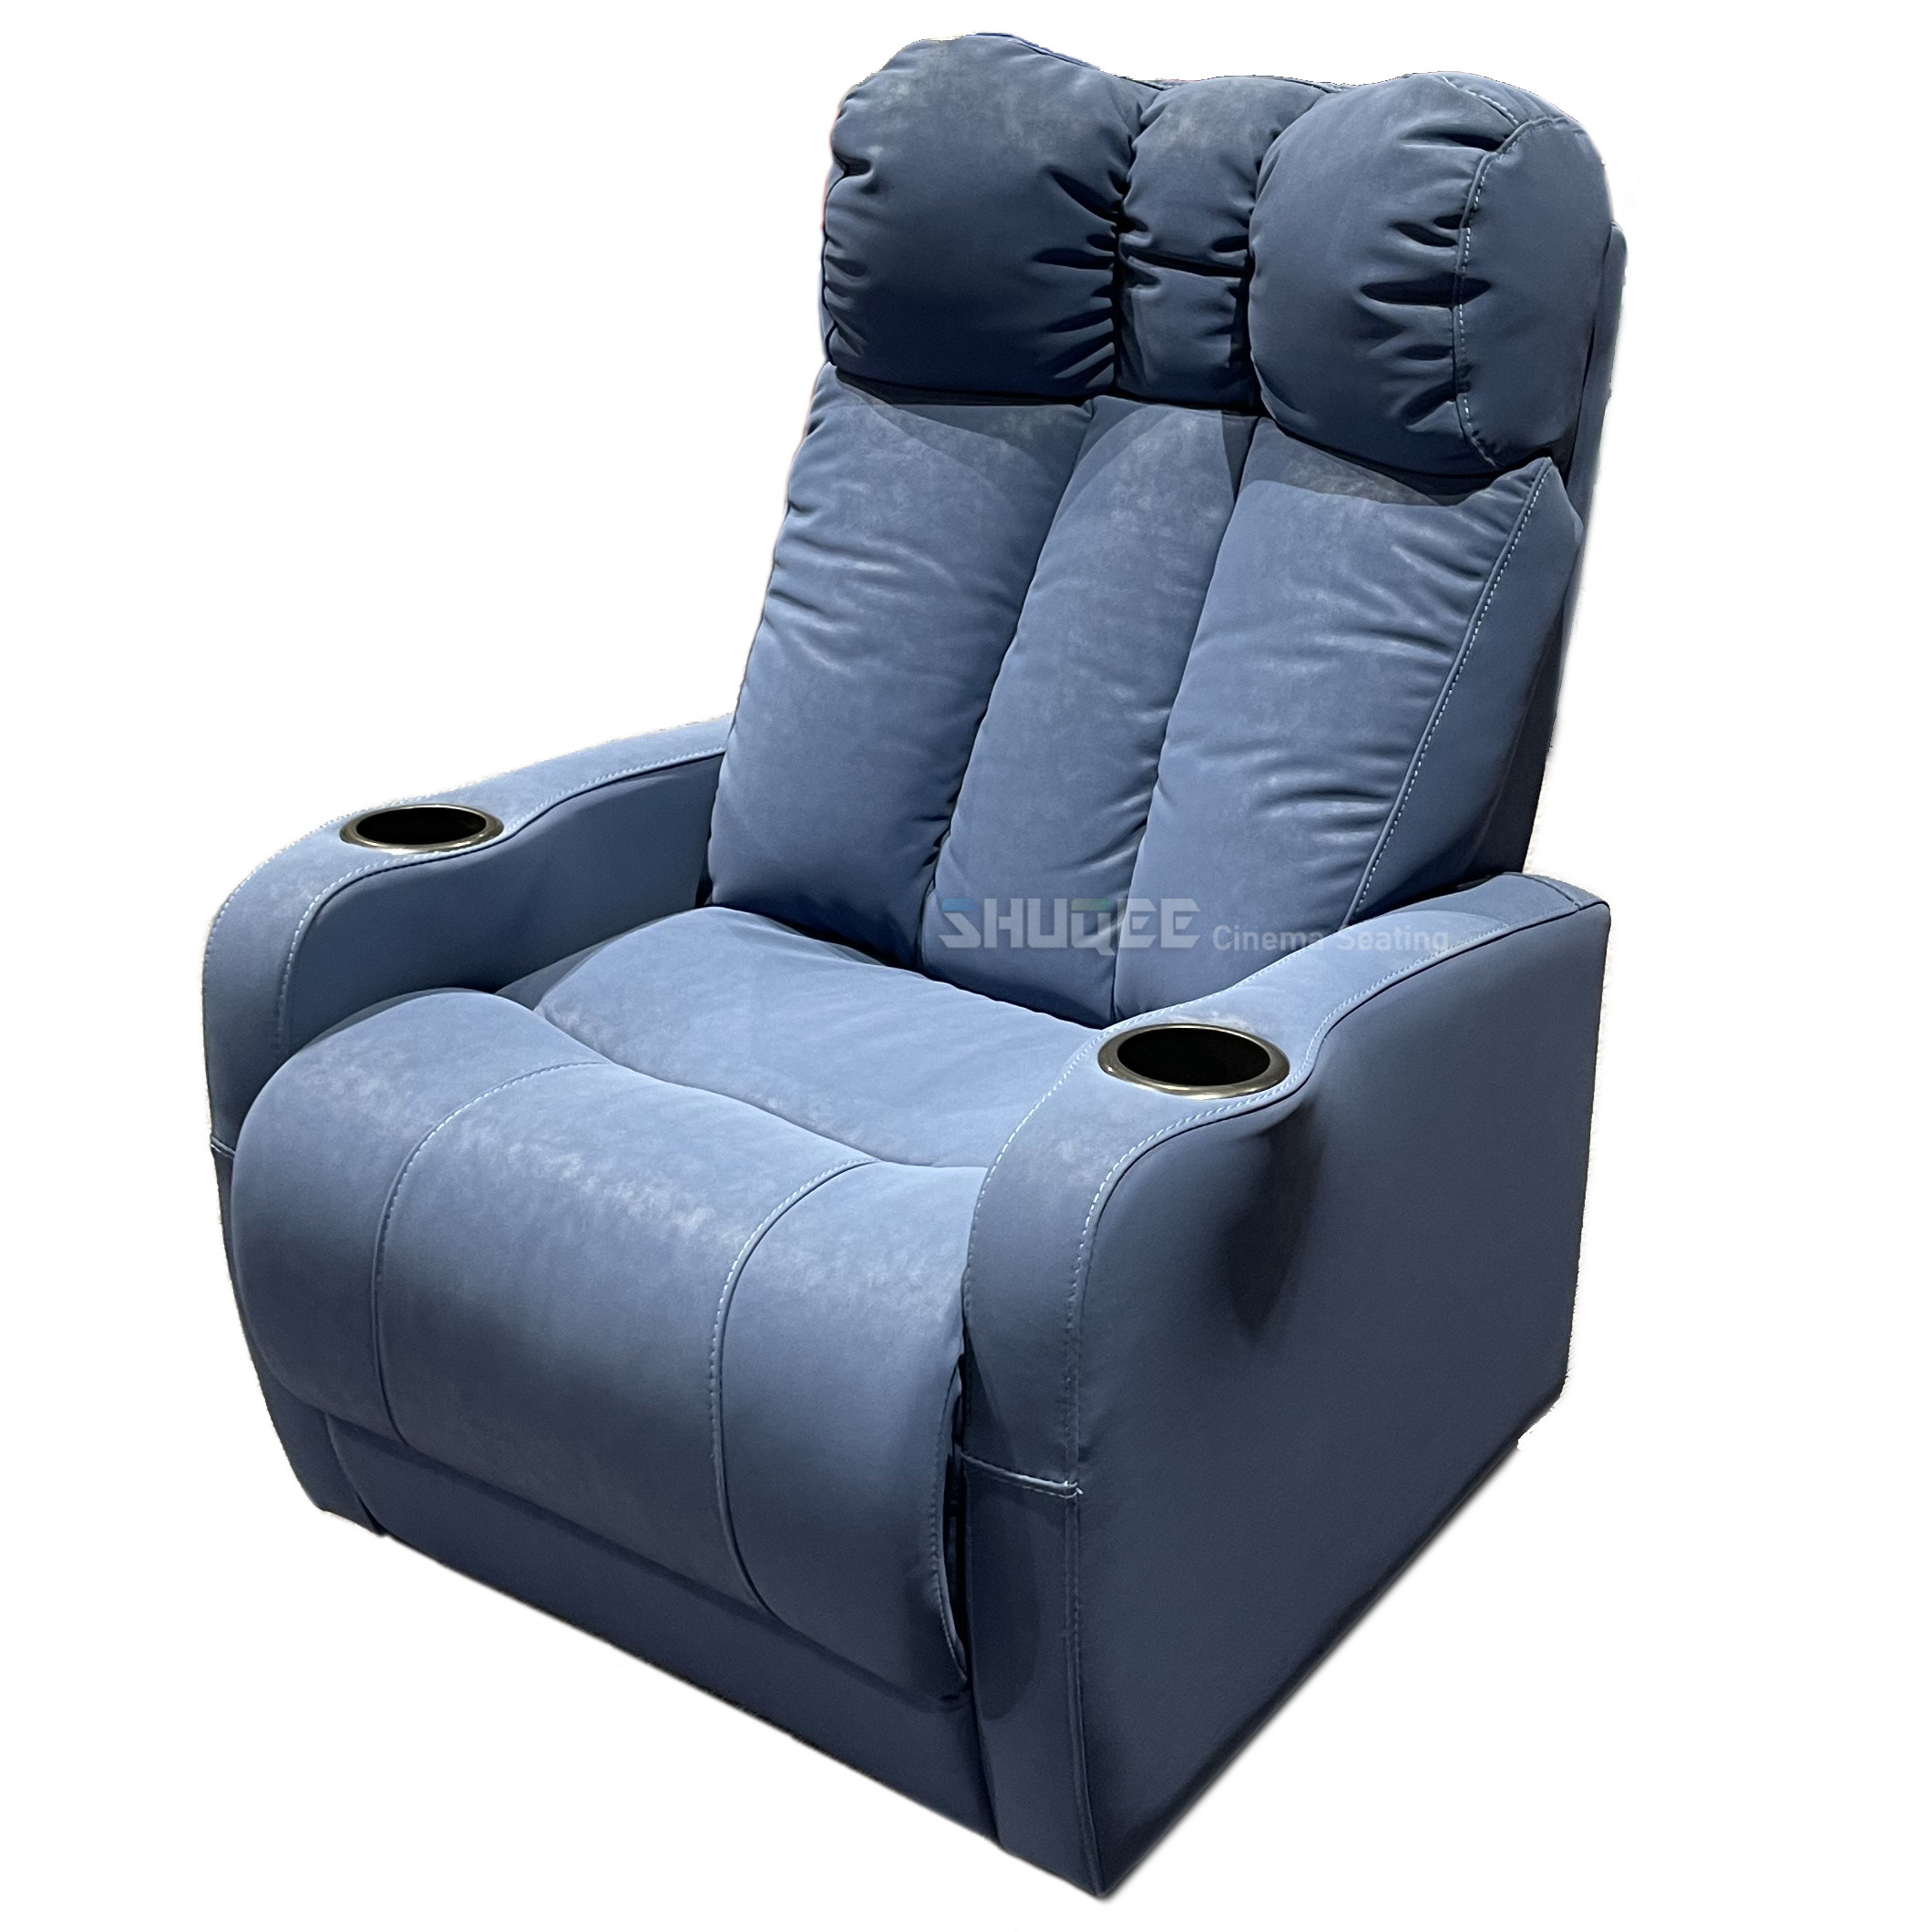 Modern Leather Home Theater Sofa Seating Multi color with Recline Function